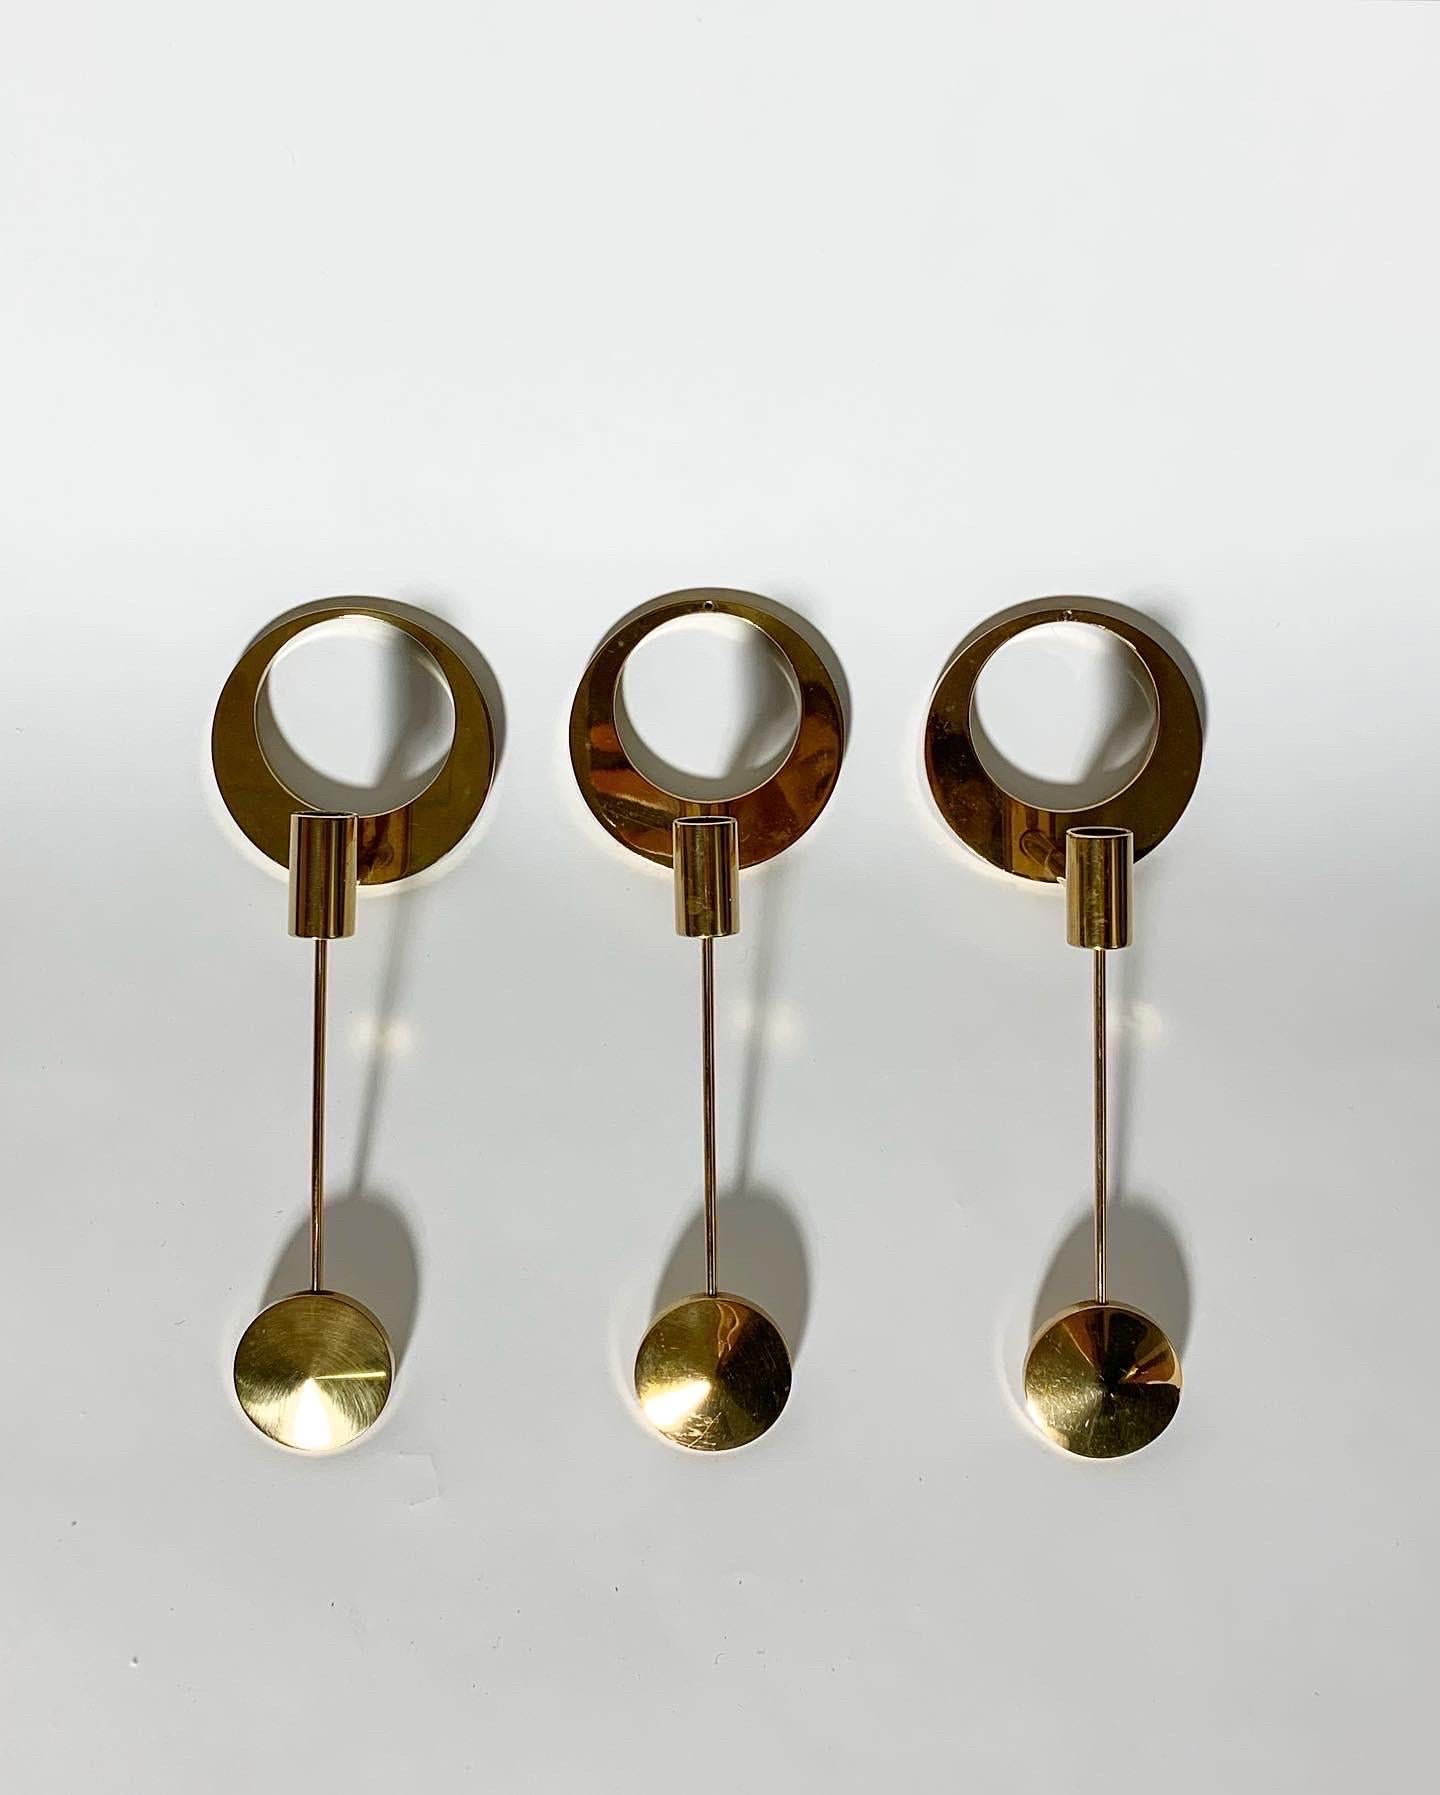 We currently have seven pieces available, one of them without a hole in top brass piece to mount it with a nail. 

Arthur Pettersson wall mounted crescent moon candle holders in solid brass, hand-crafted in Kolbäck, Sweden in the 1960s.

Brass